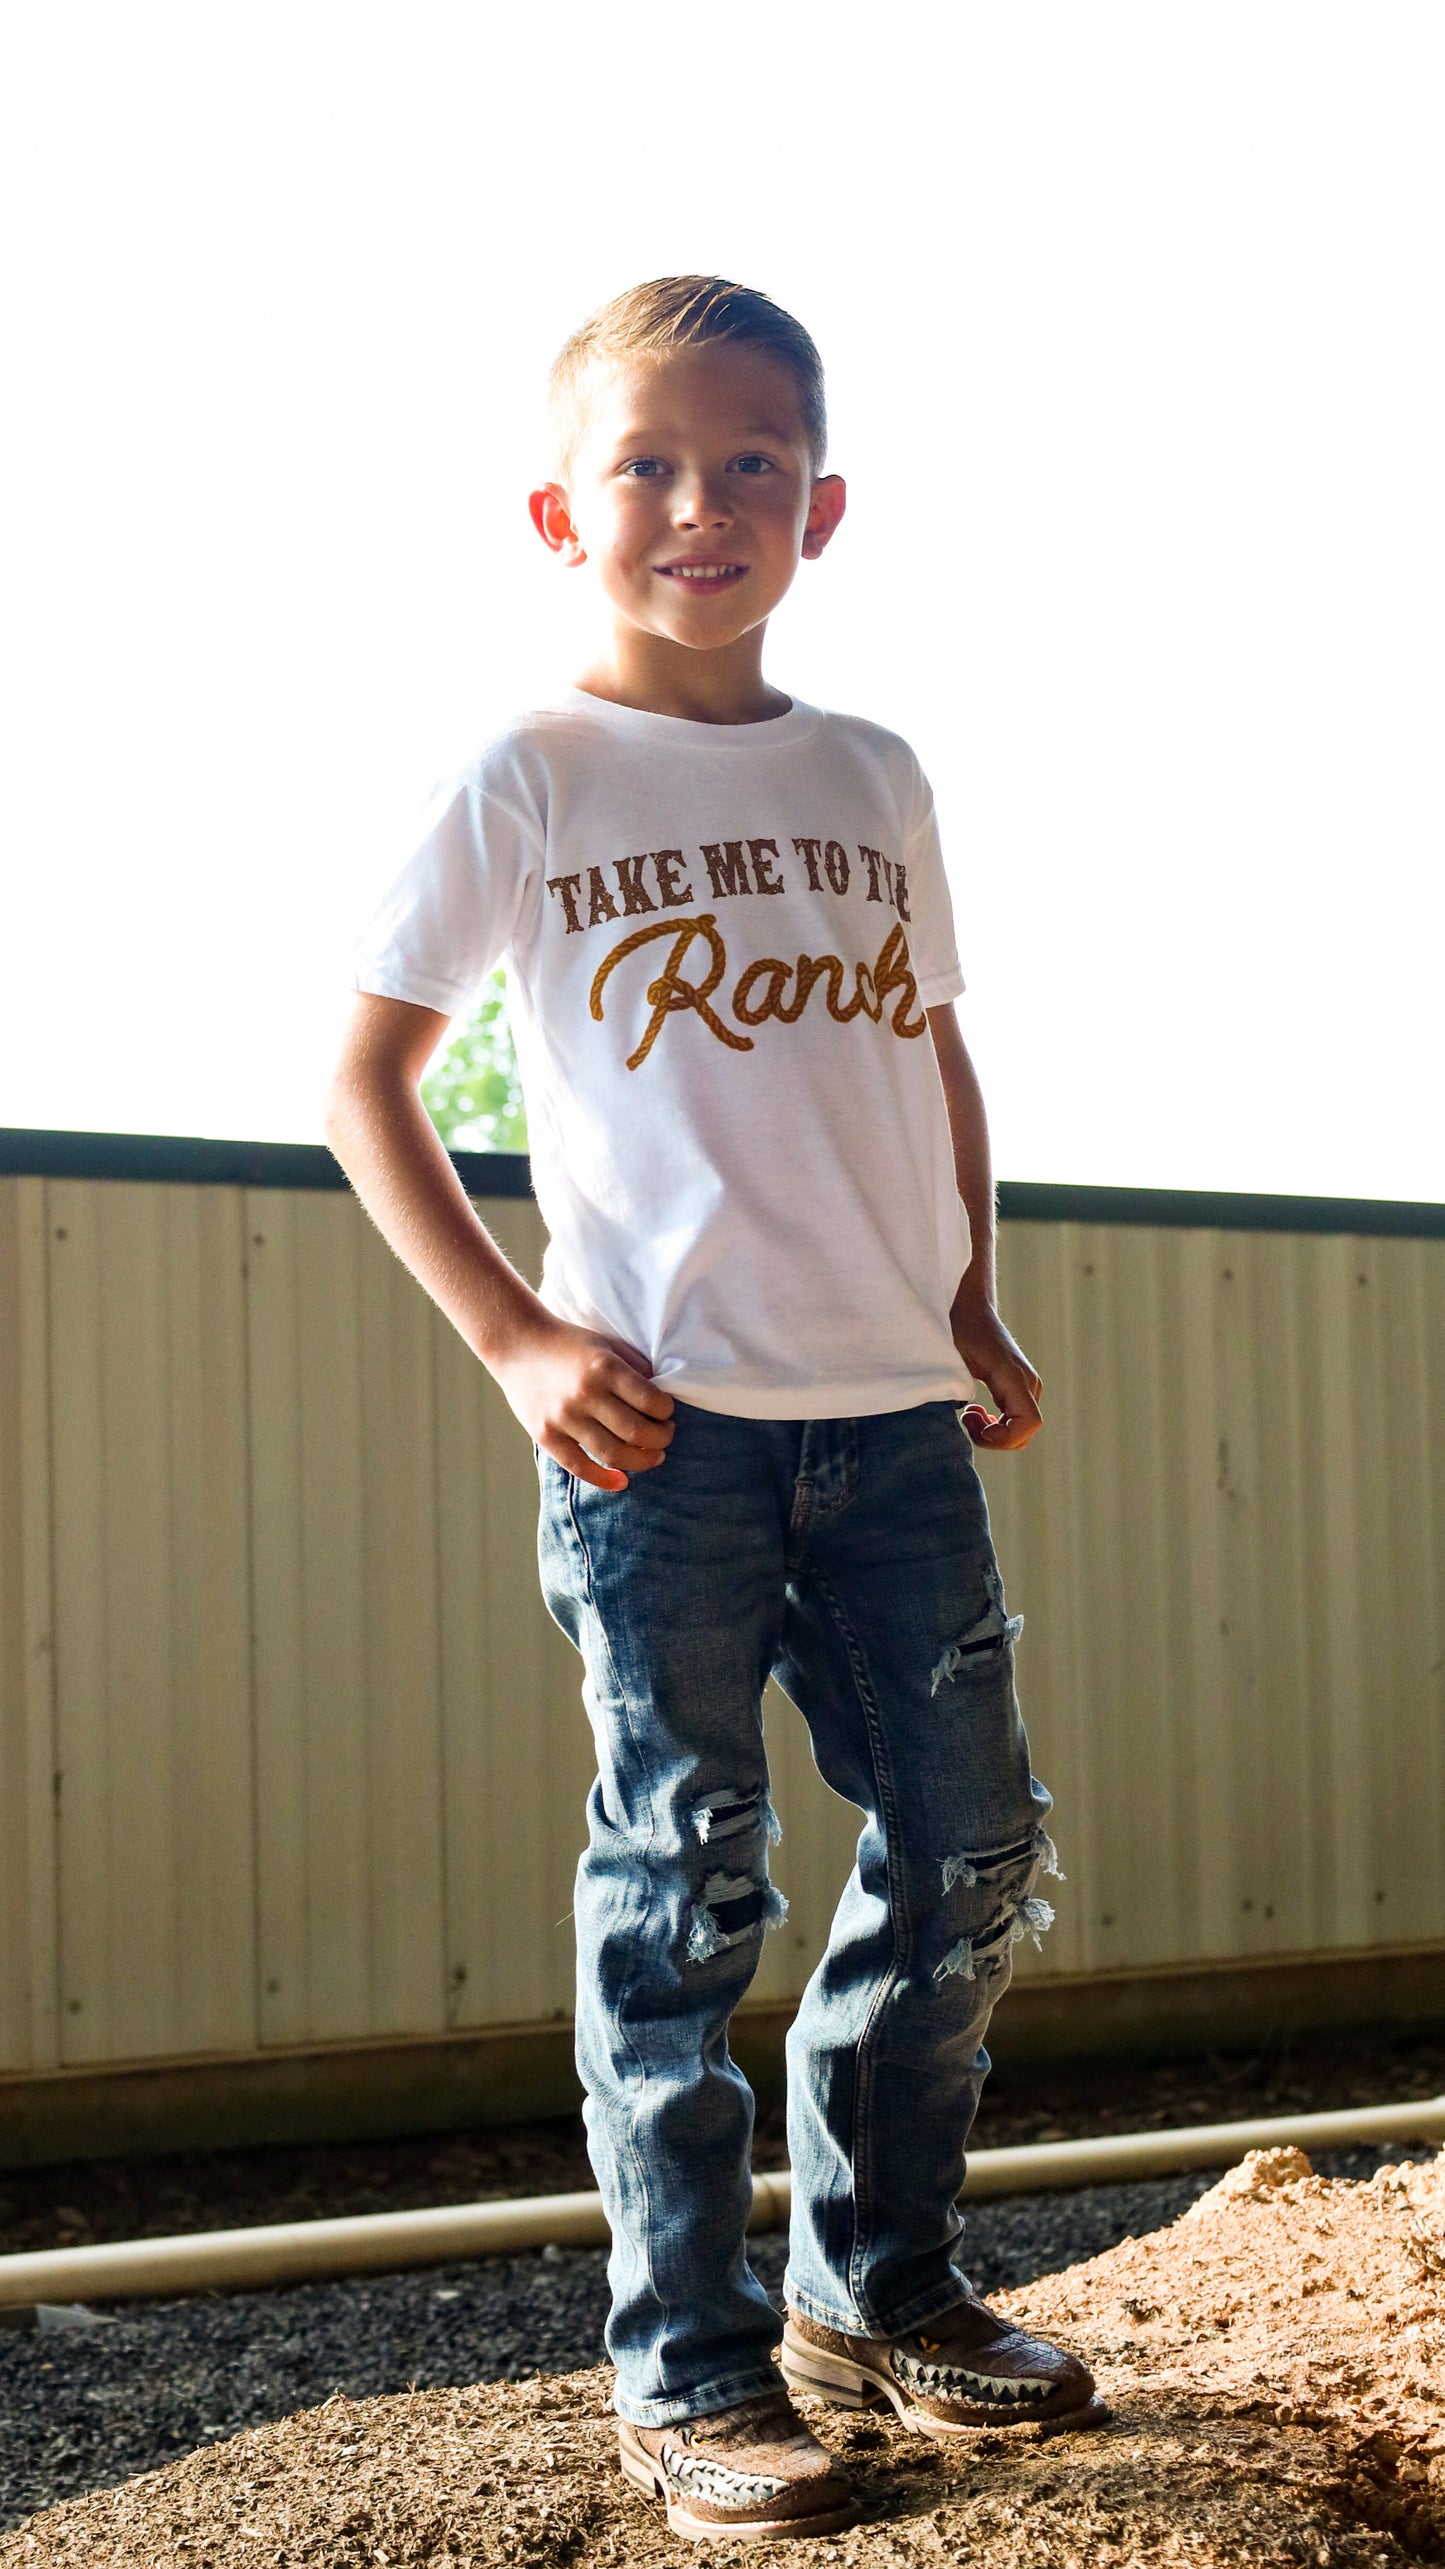 Youth Take Me to the Ranch Tee